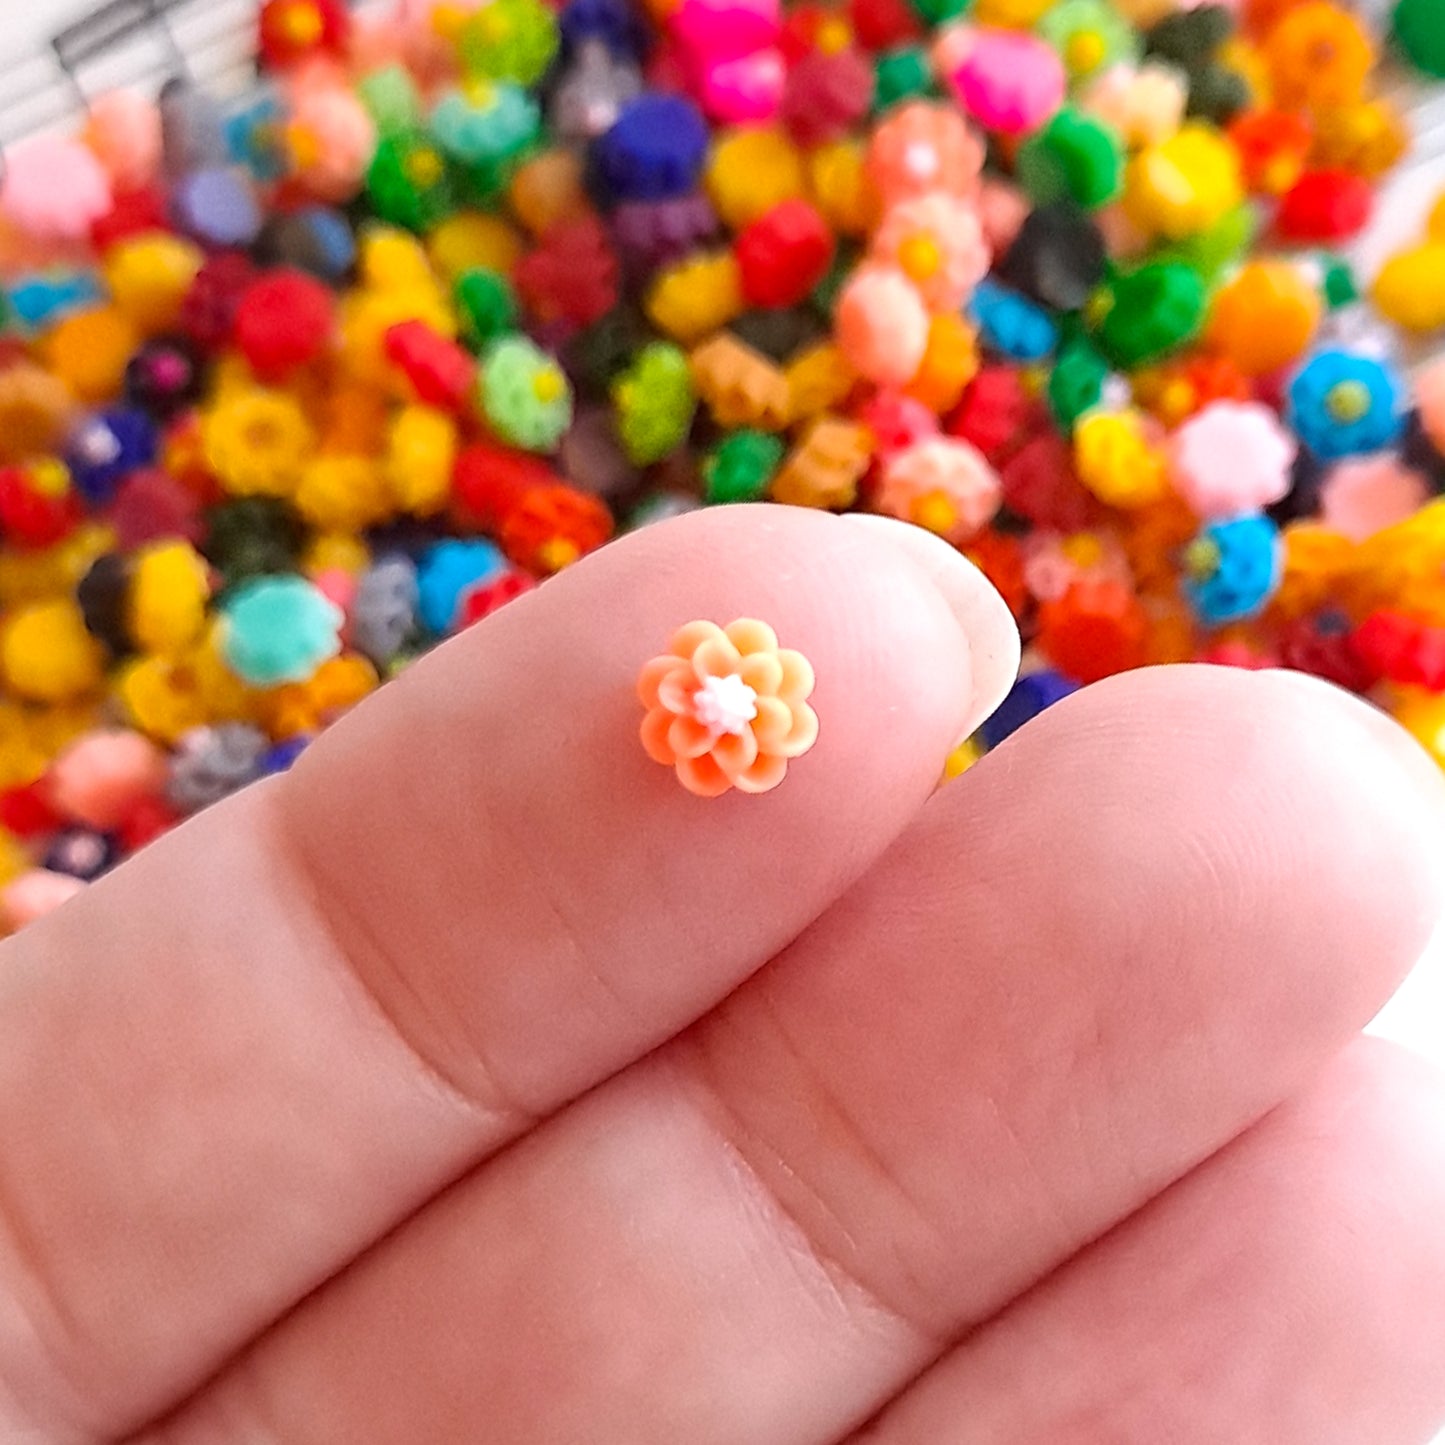 Tiny 5.75mm Dahlia Cabochons, Colorful Autumn Mix Resin Flowers, Flatback Floral Chrysanthemum Mums for DIY Crafts Nails